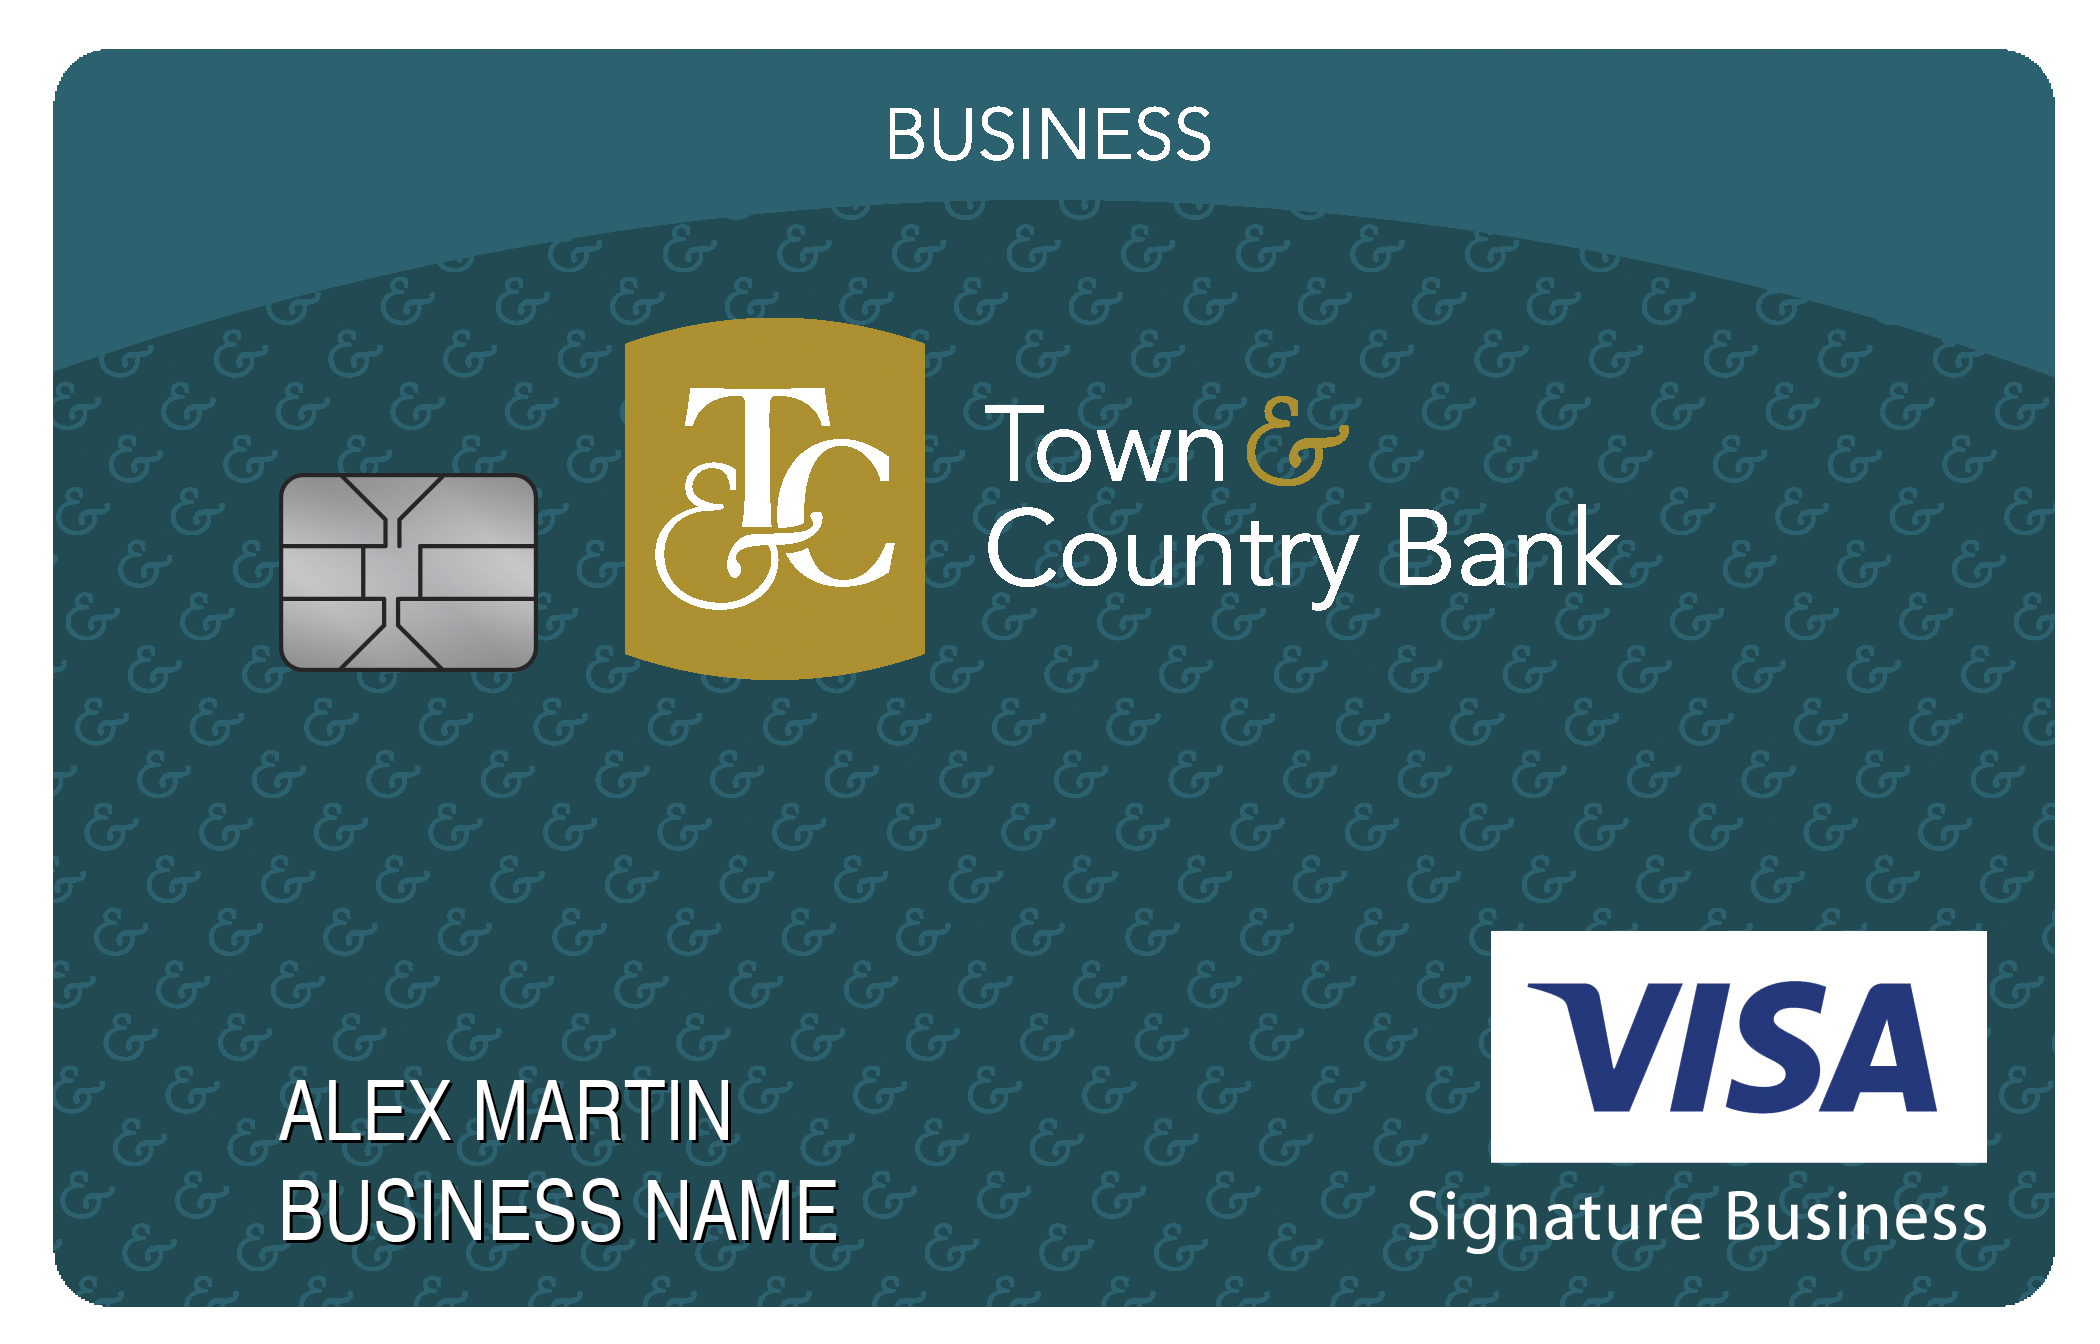 Town & Country Bank Smart Business Rewards Card